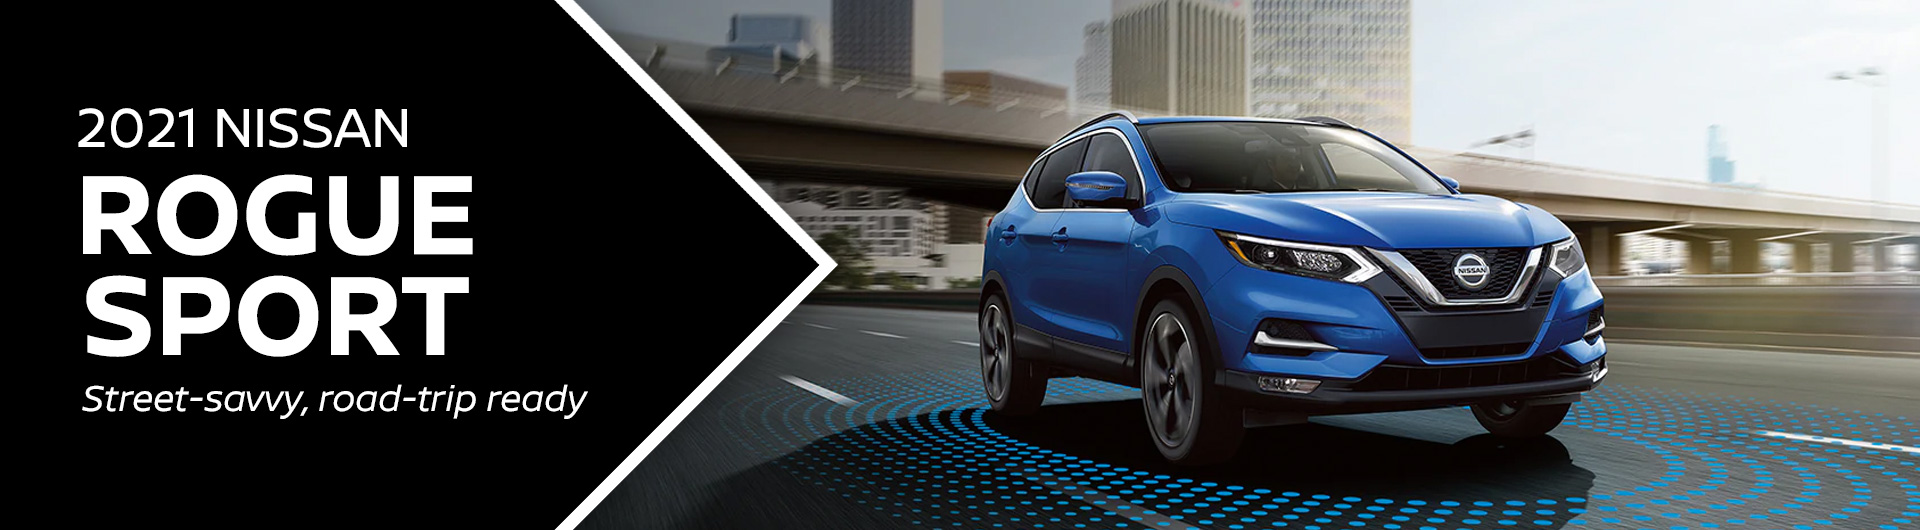 how to connect nissan connect to nissan rogue s 2019